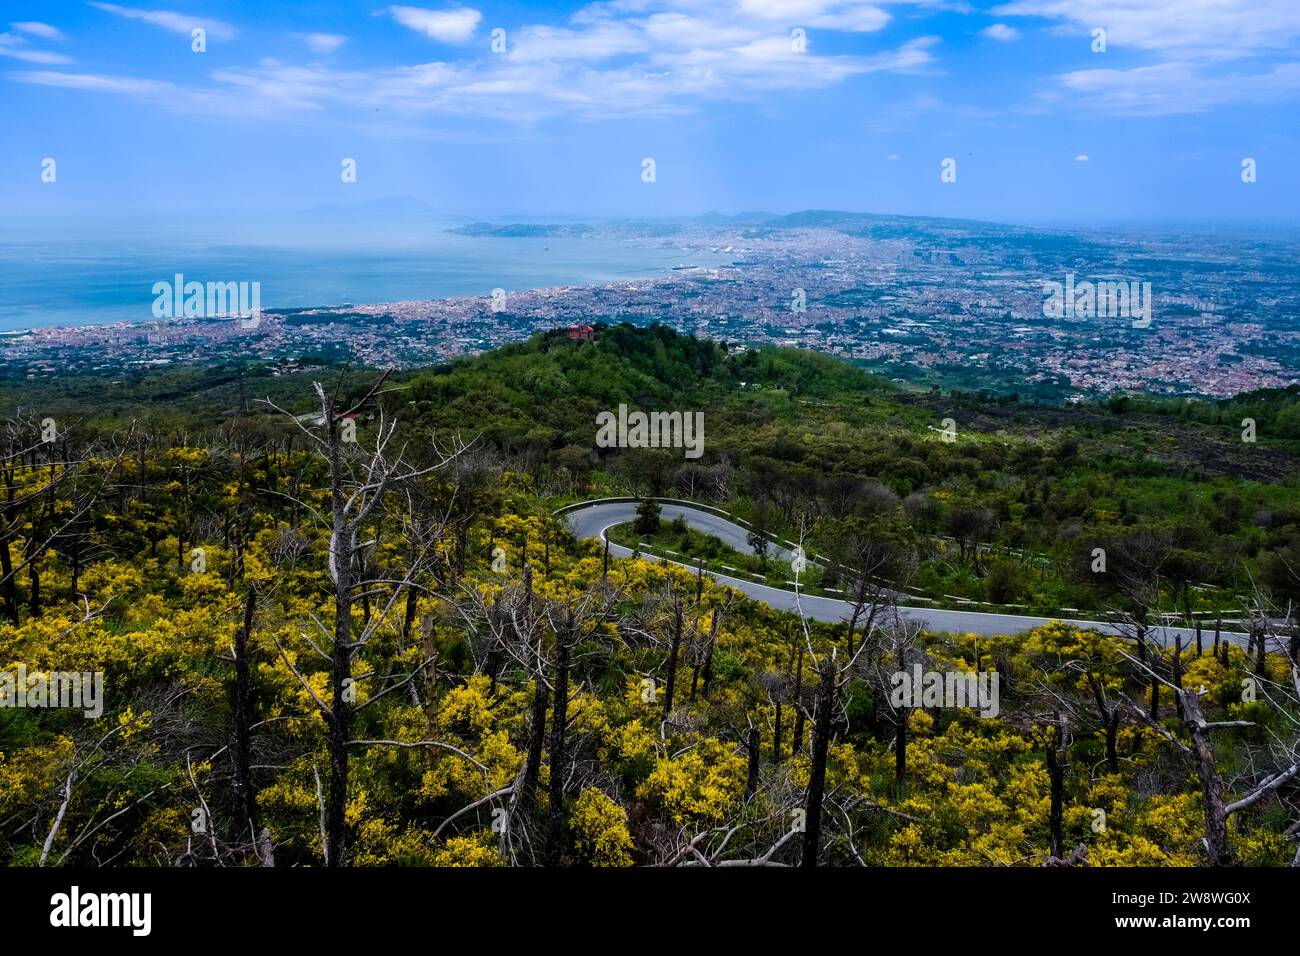 Aerial view on the bay and town of Naples from the wooded slopes of the volcano Vesuvius. Stock Photo